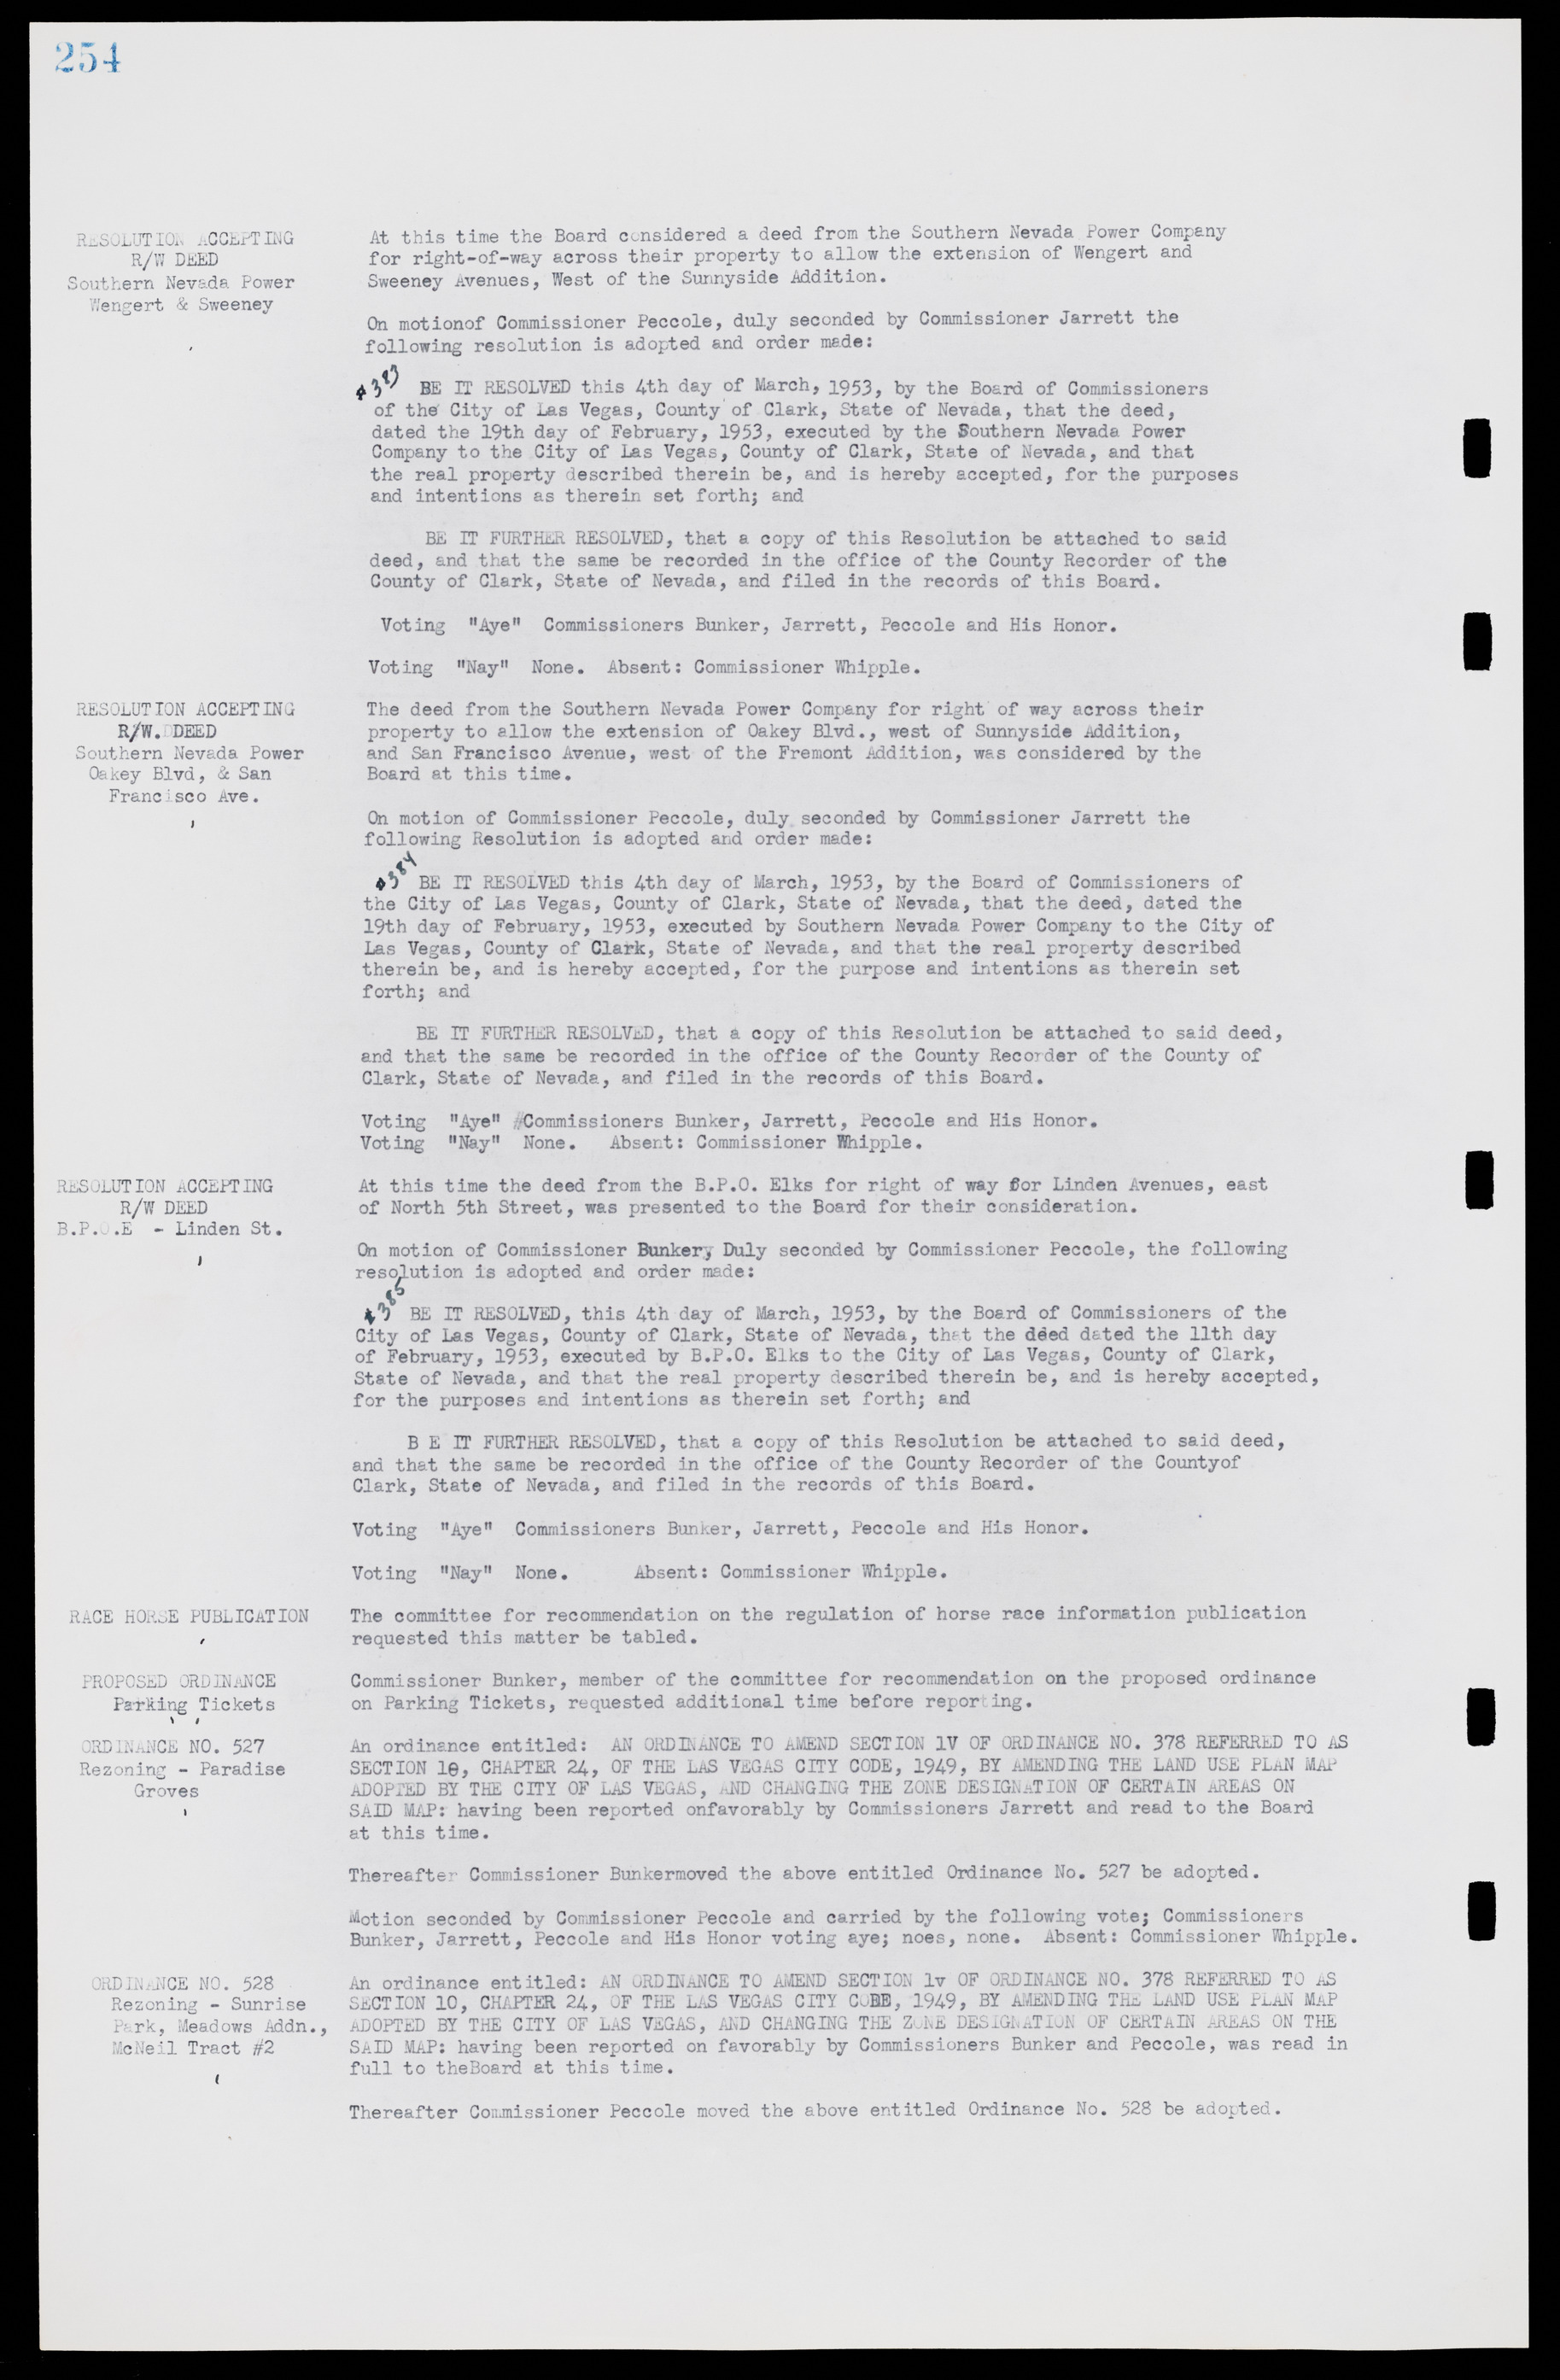 Las Vegas City Commission Minutes, May 26, 1952 to February 17, 1954, lvc000008-270